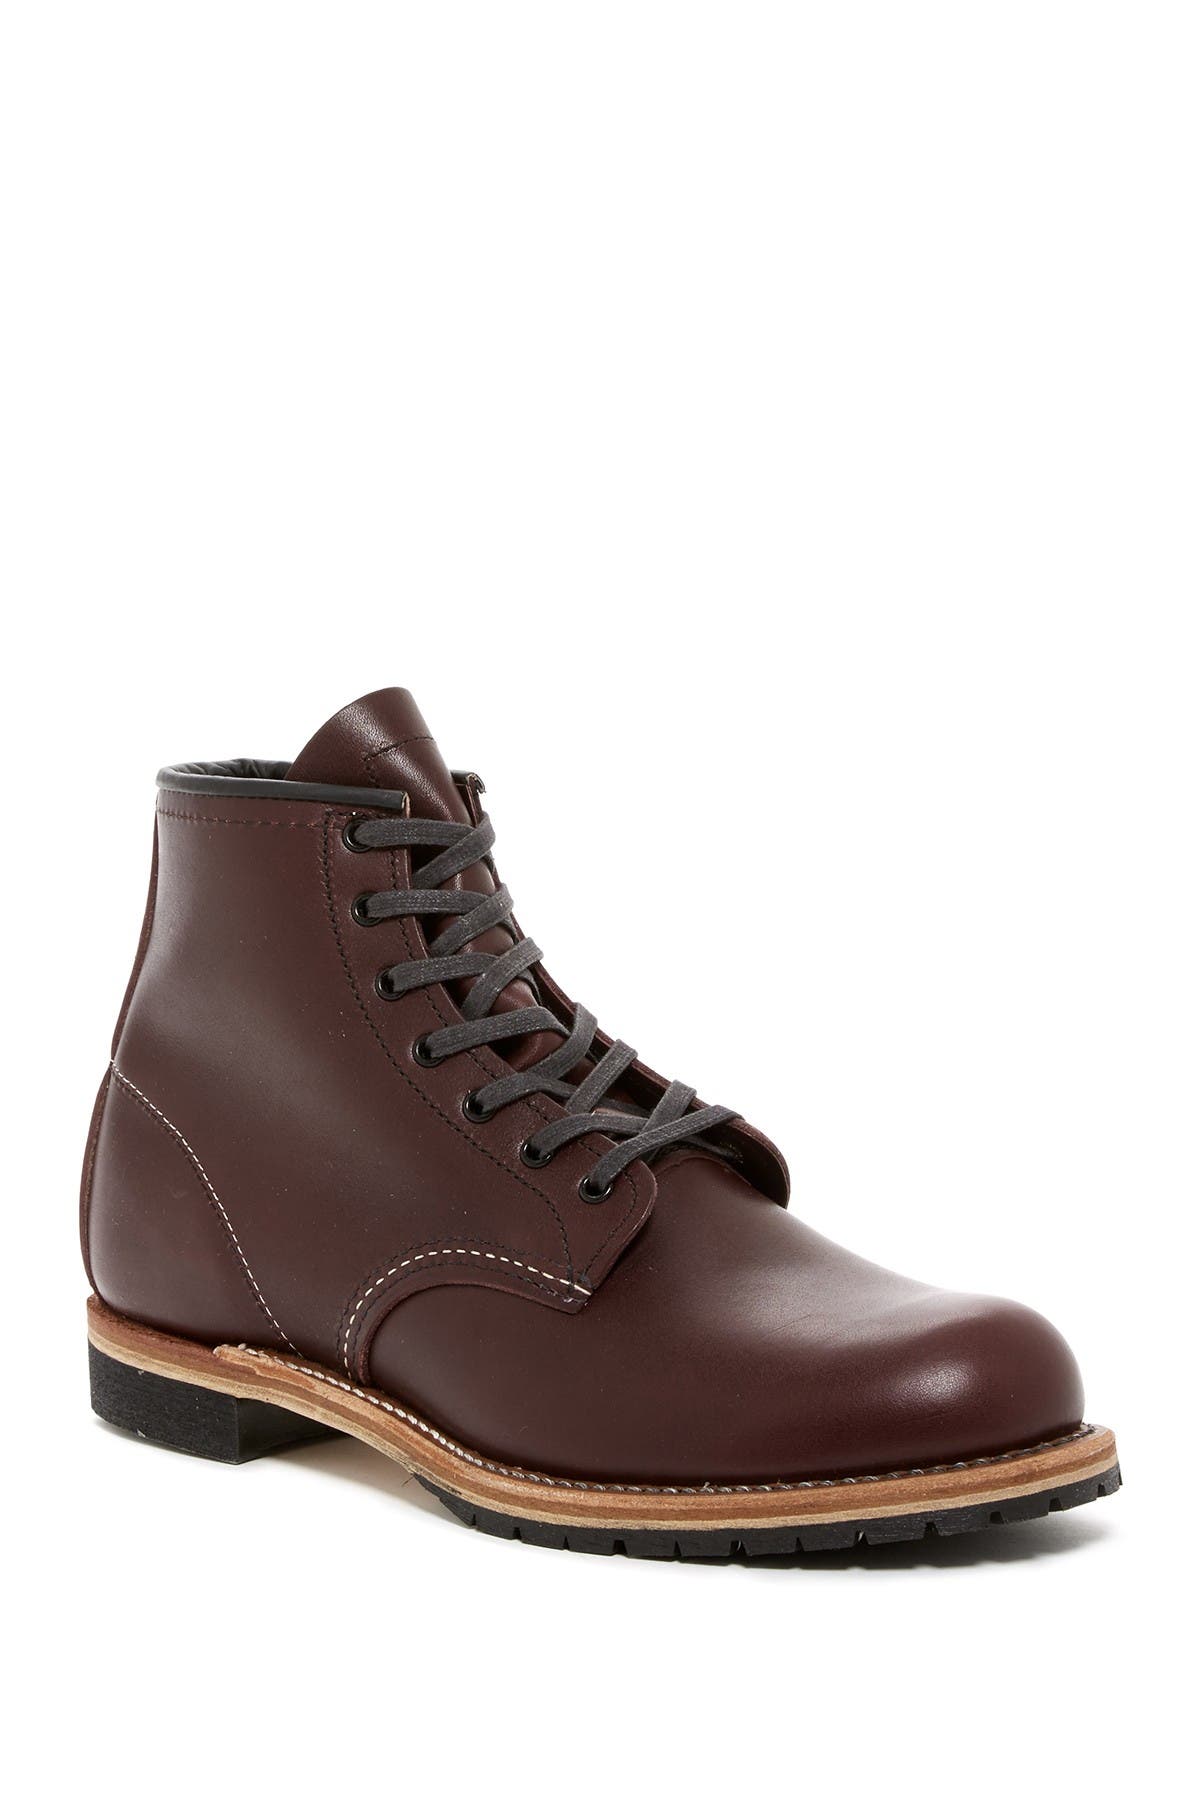 red wing beckman